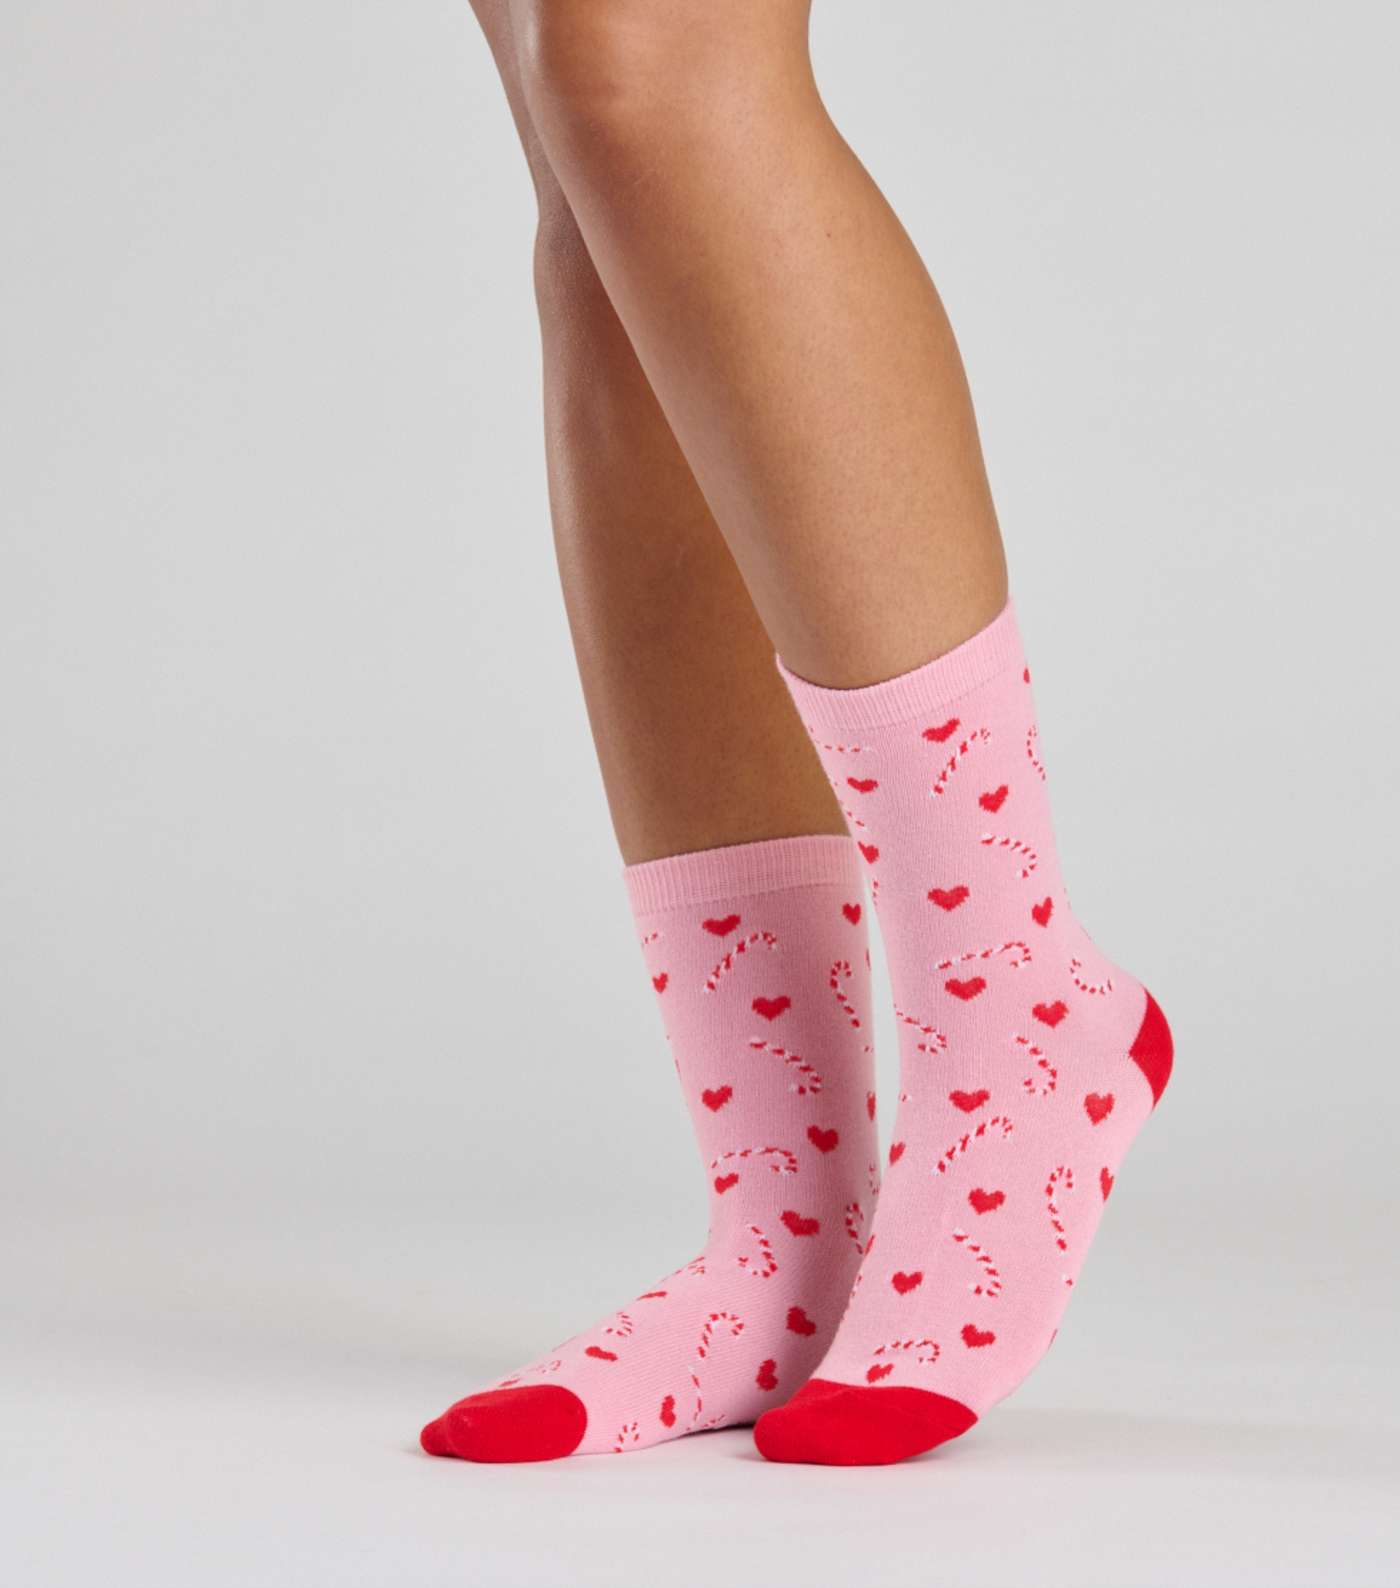 Loungeable Pink Heart Candy Cane Socks in a Sock Bag Image 4